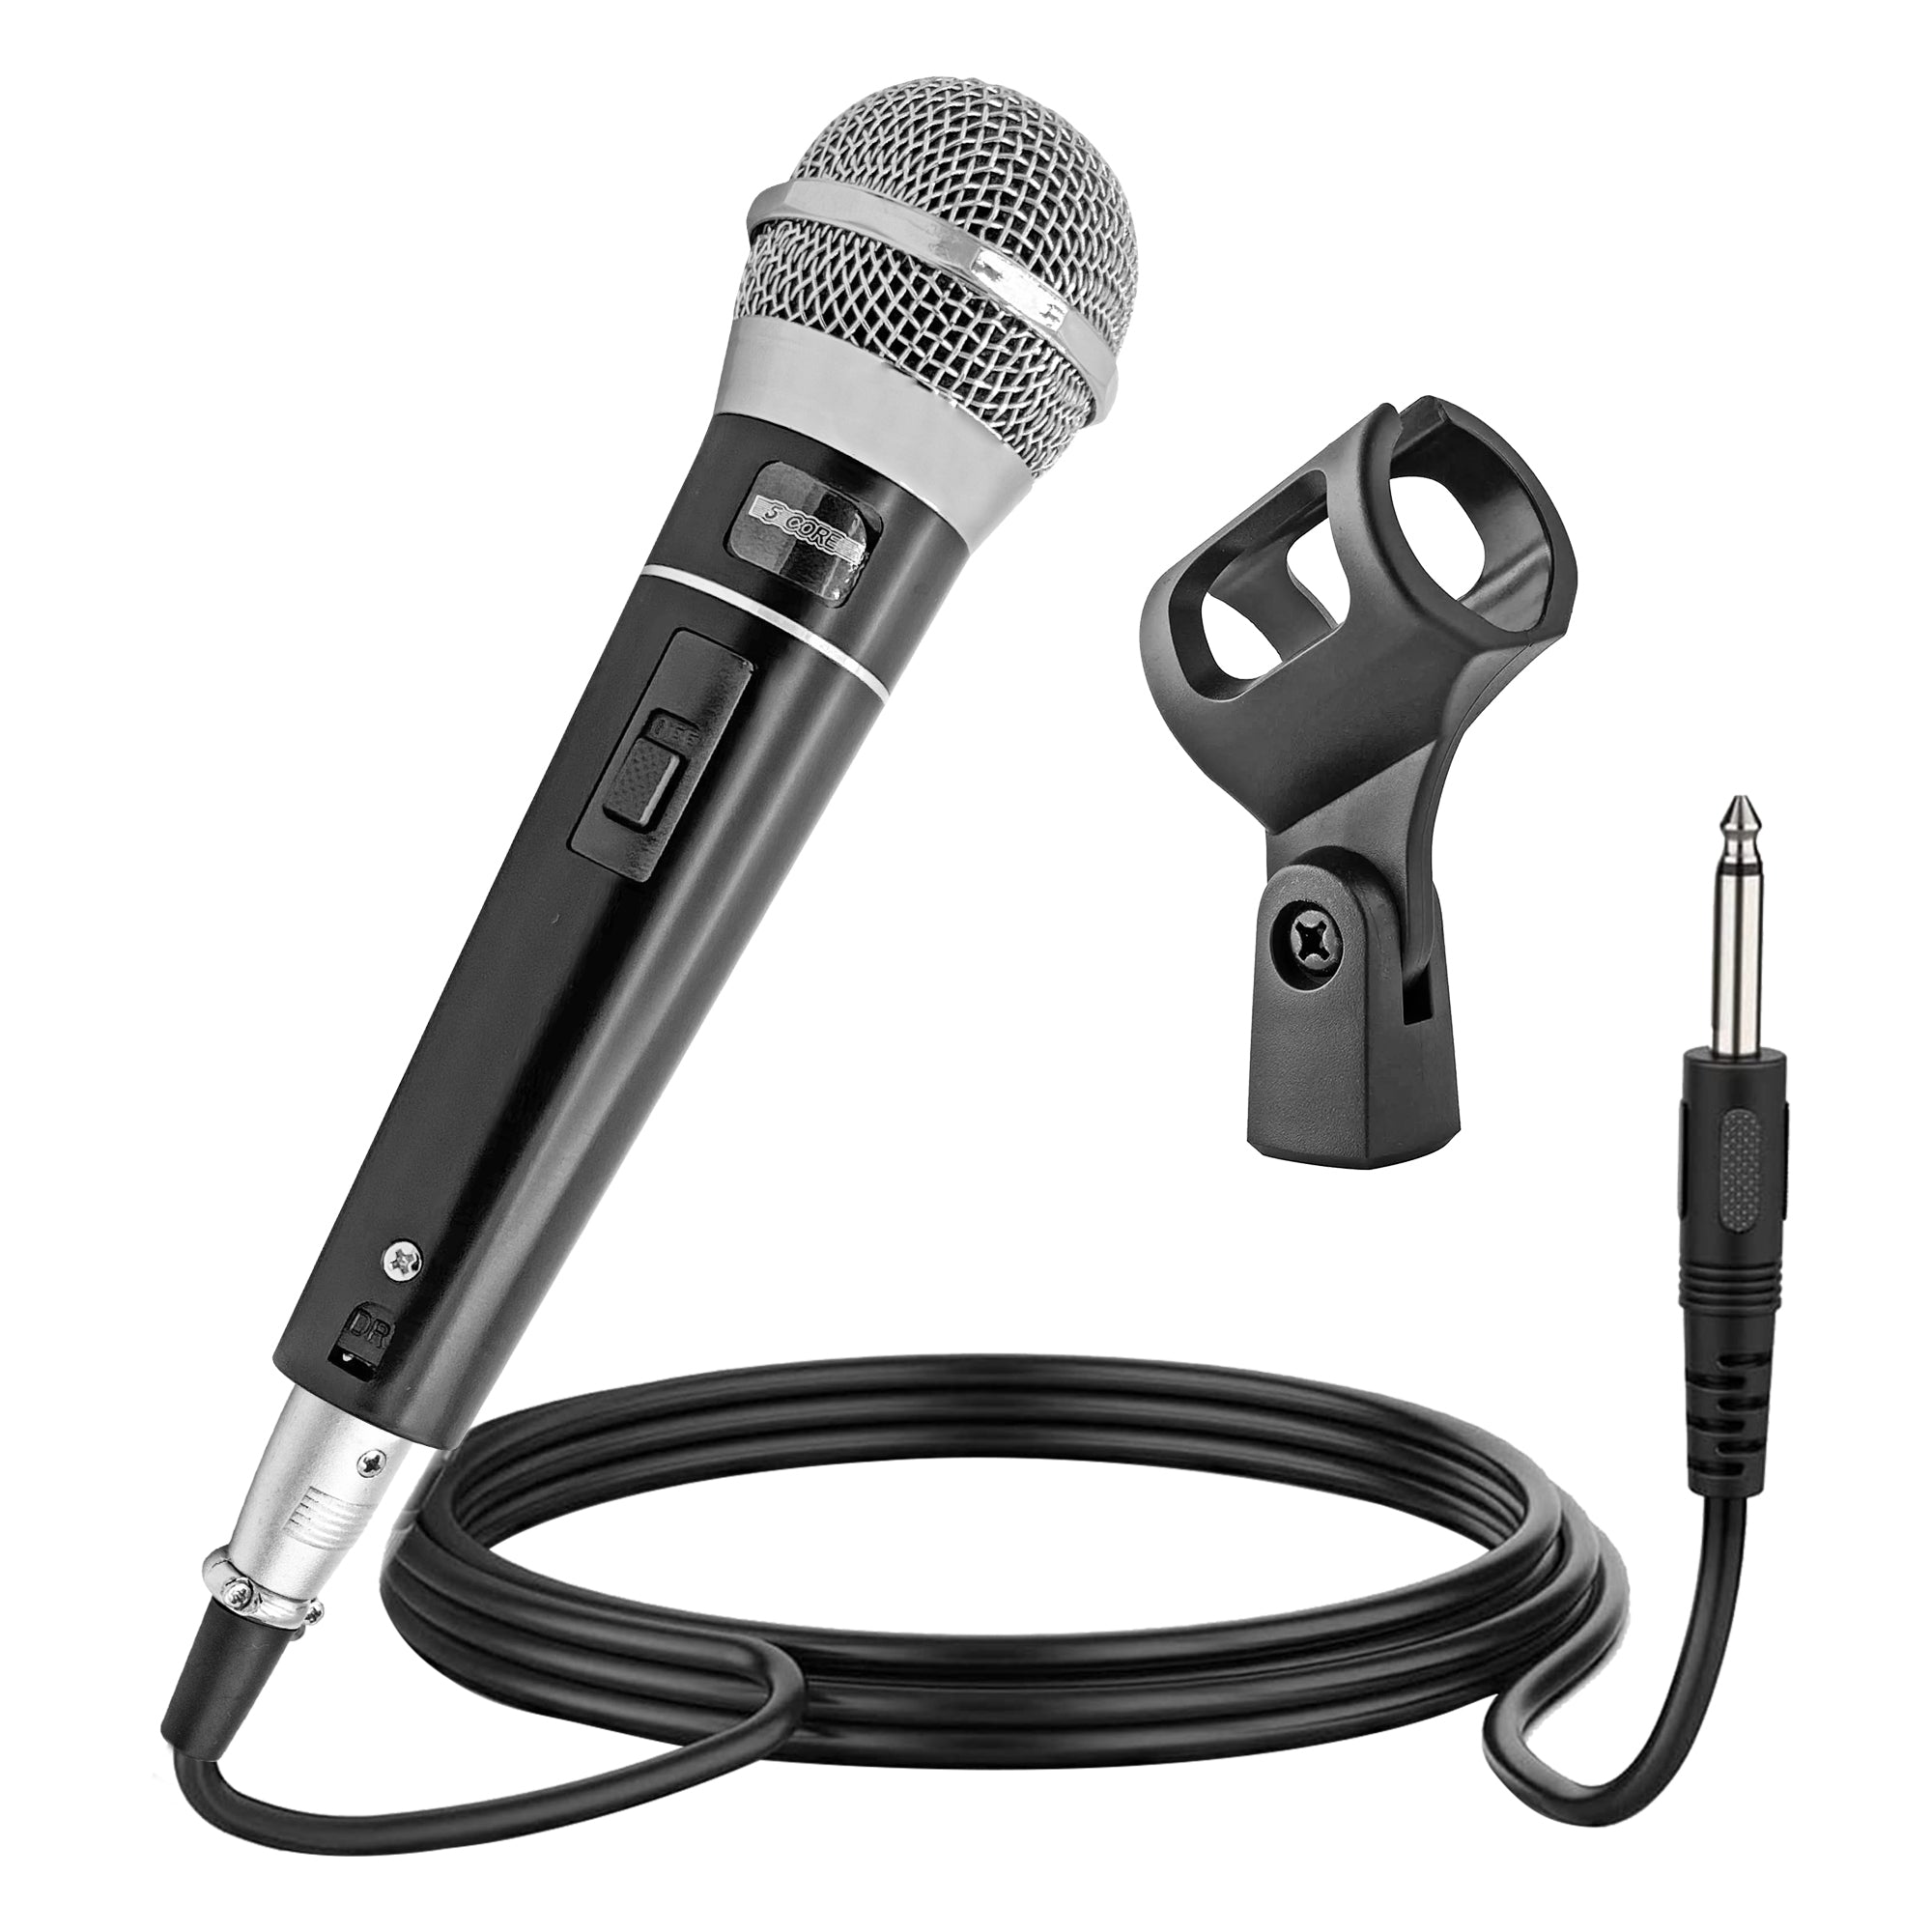 Brand New Mini Karaoke Condenser Microphone for Cellphone/Tablet/Laptop/PC  Mini Wired Karaoke Microphone